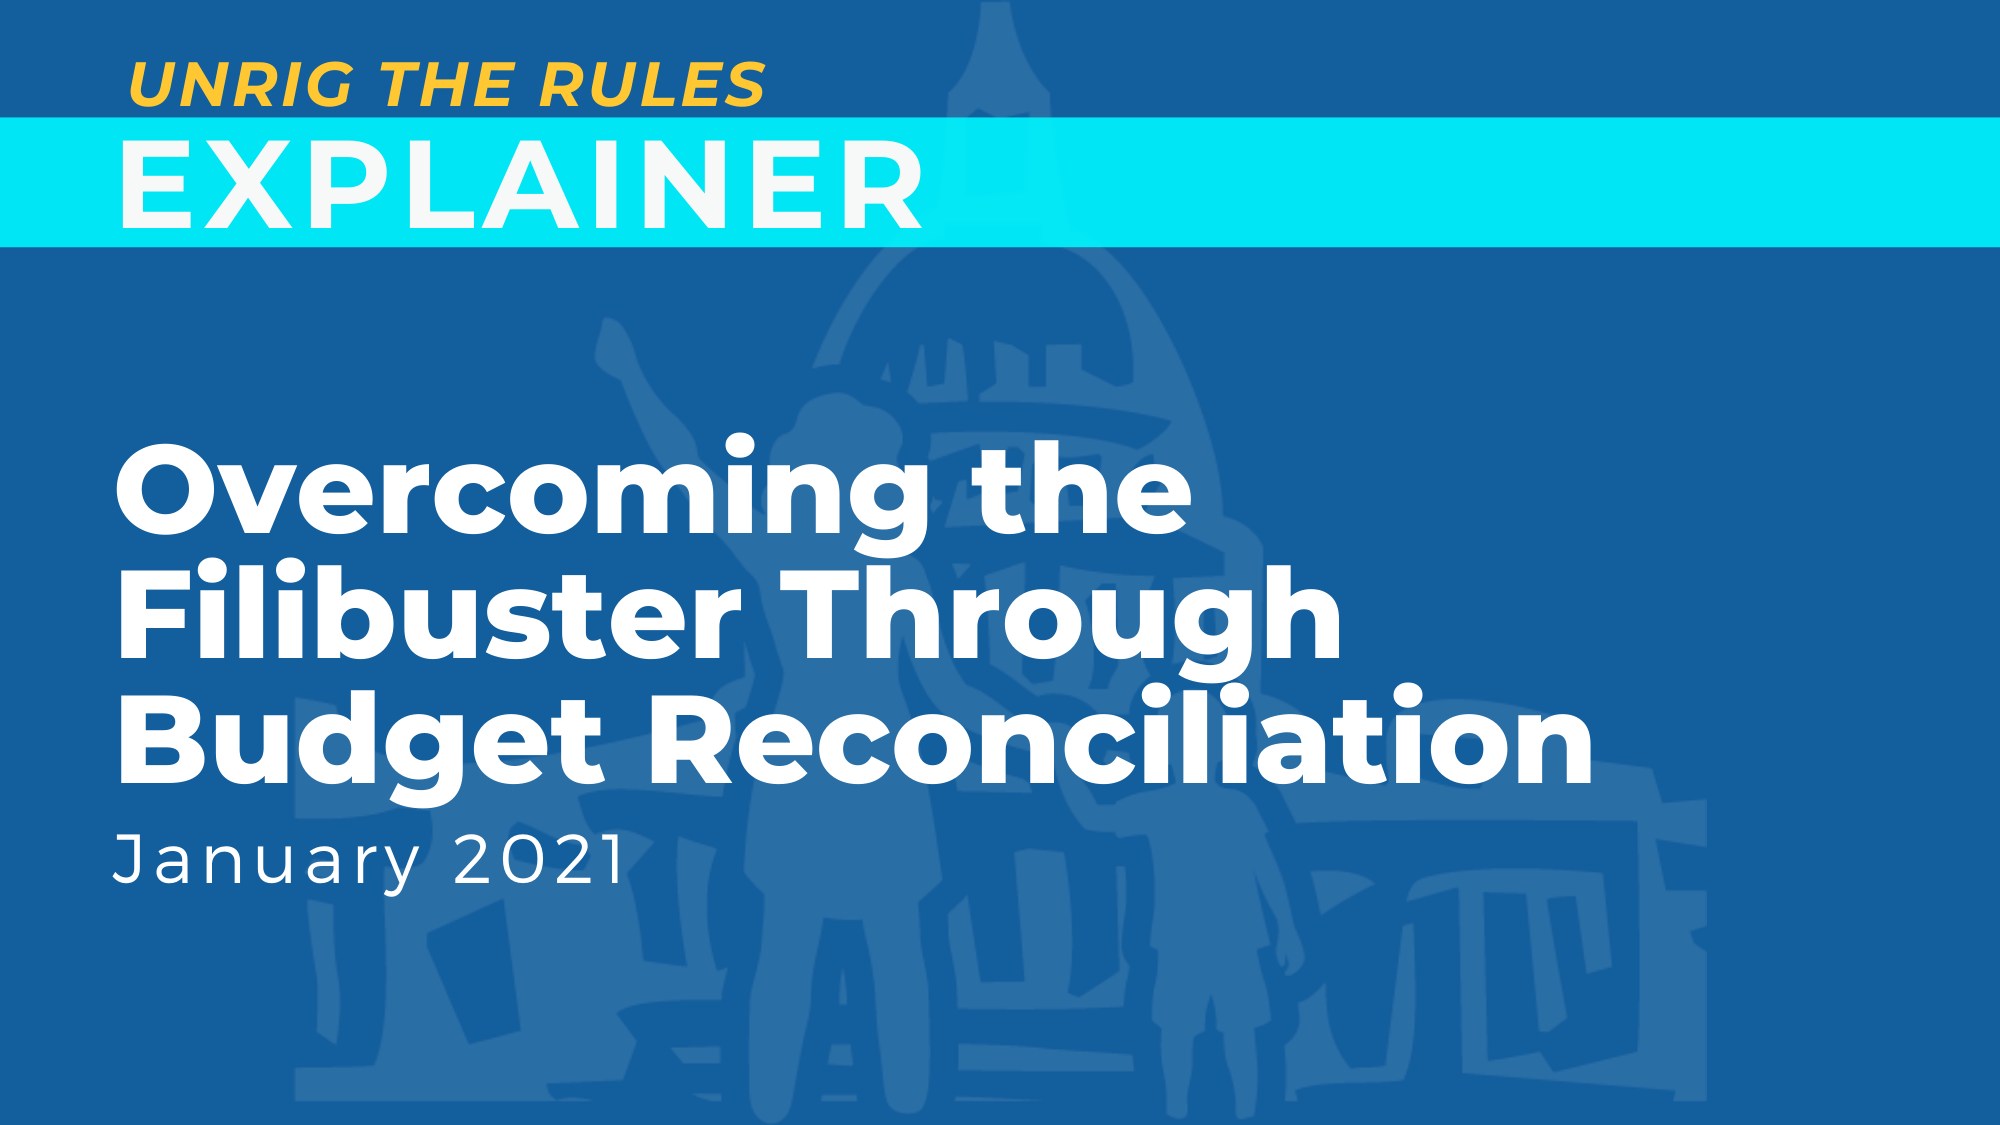 Overcoming the Filibuster Through Budget Reconciliation